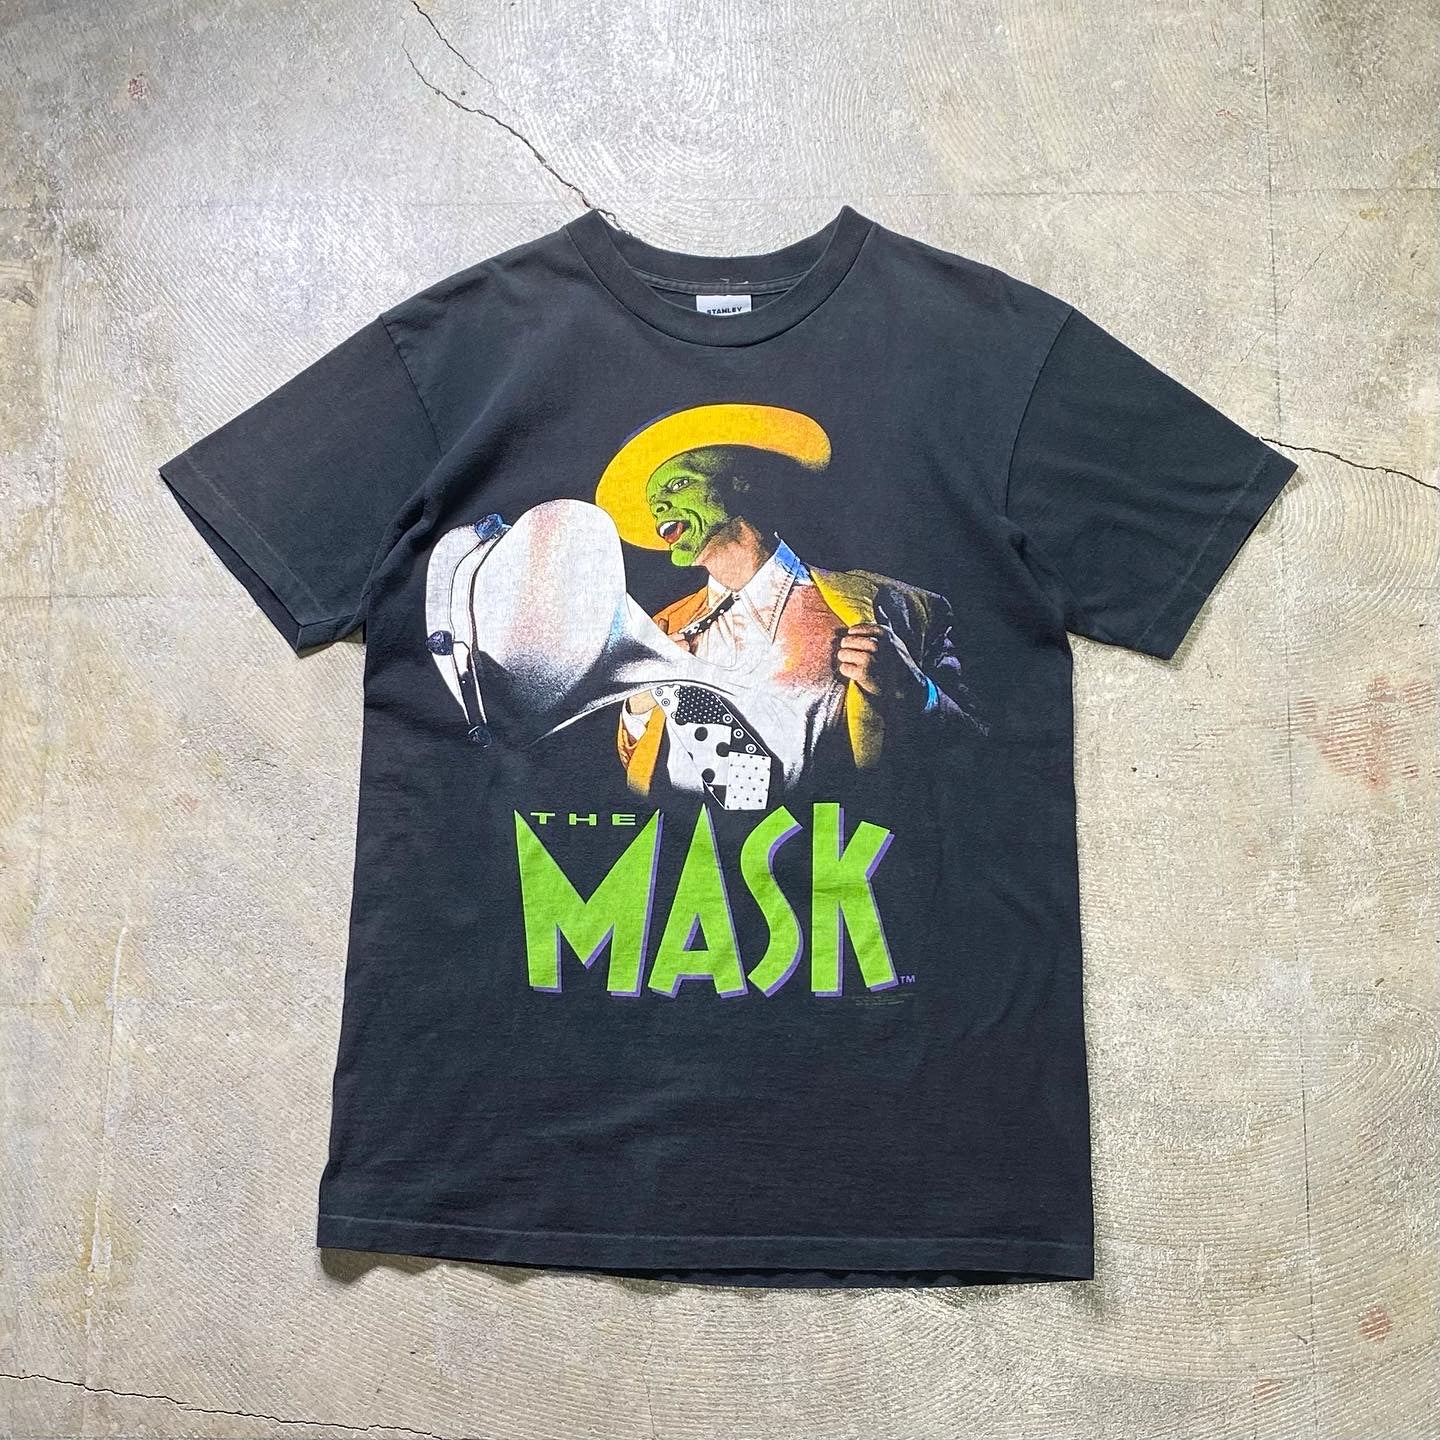 1990's THE MASK T-SHIRT (size L)